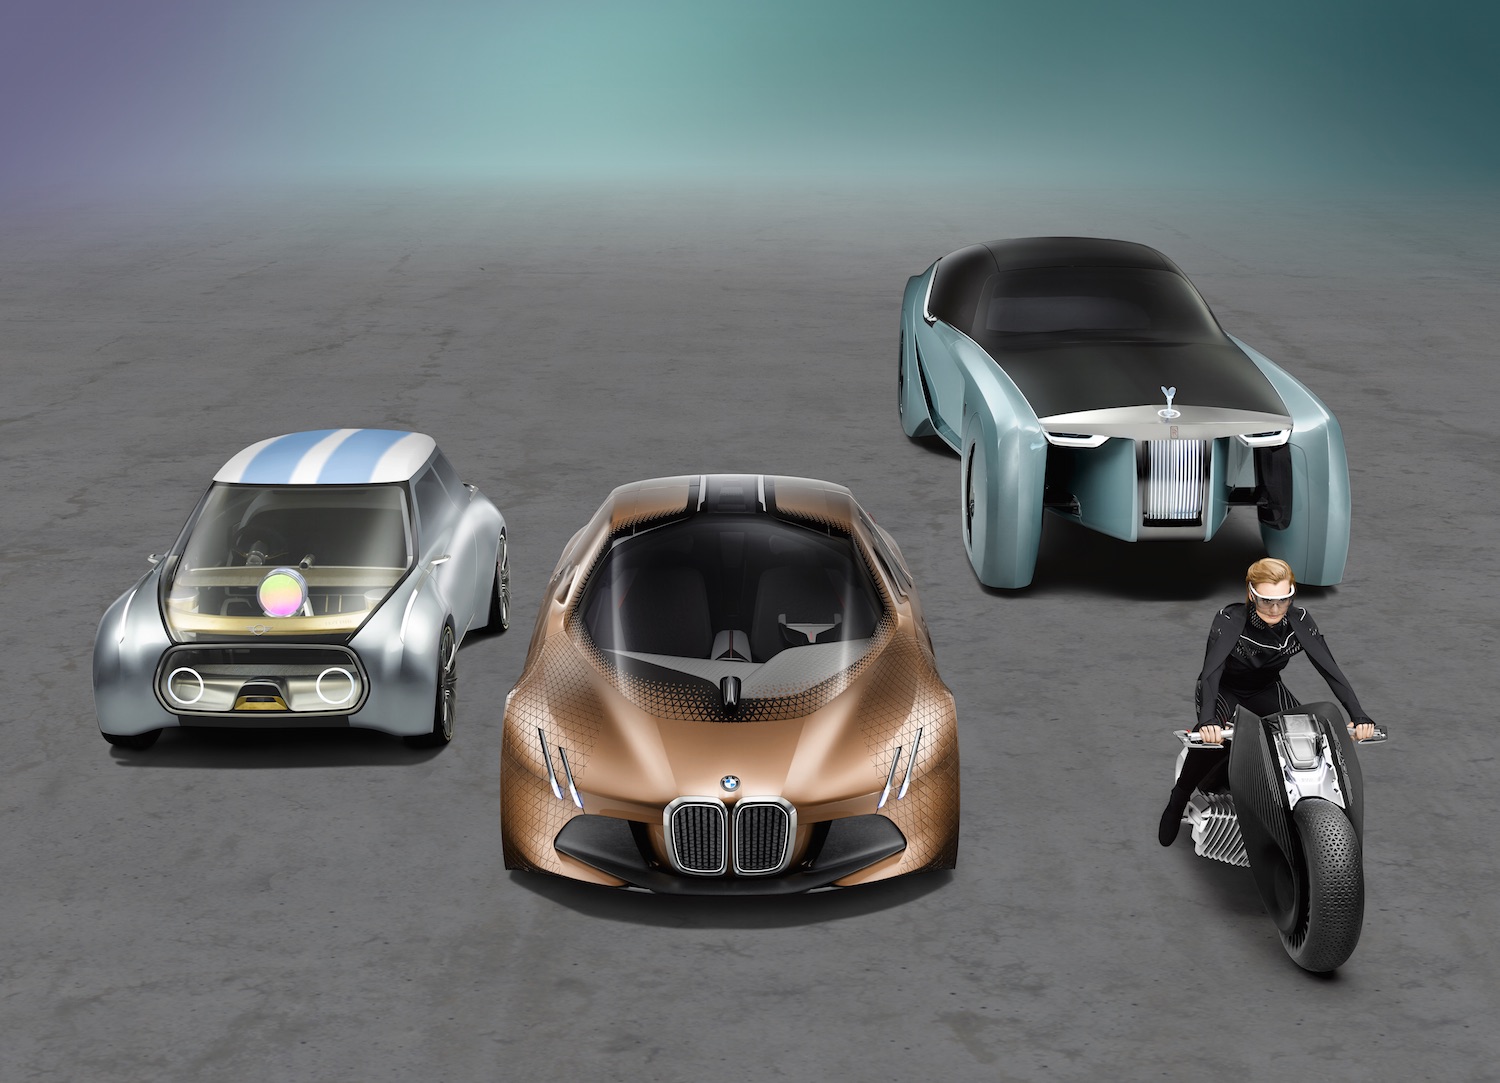 BMW Vision Next 100 driverless automated self-driving artificial intelligence tests